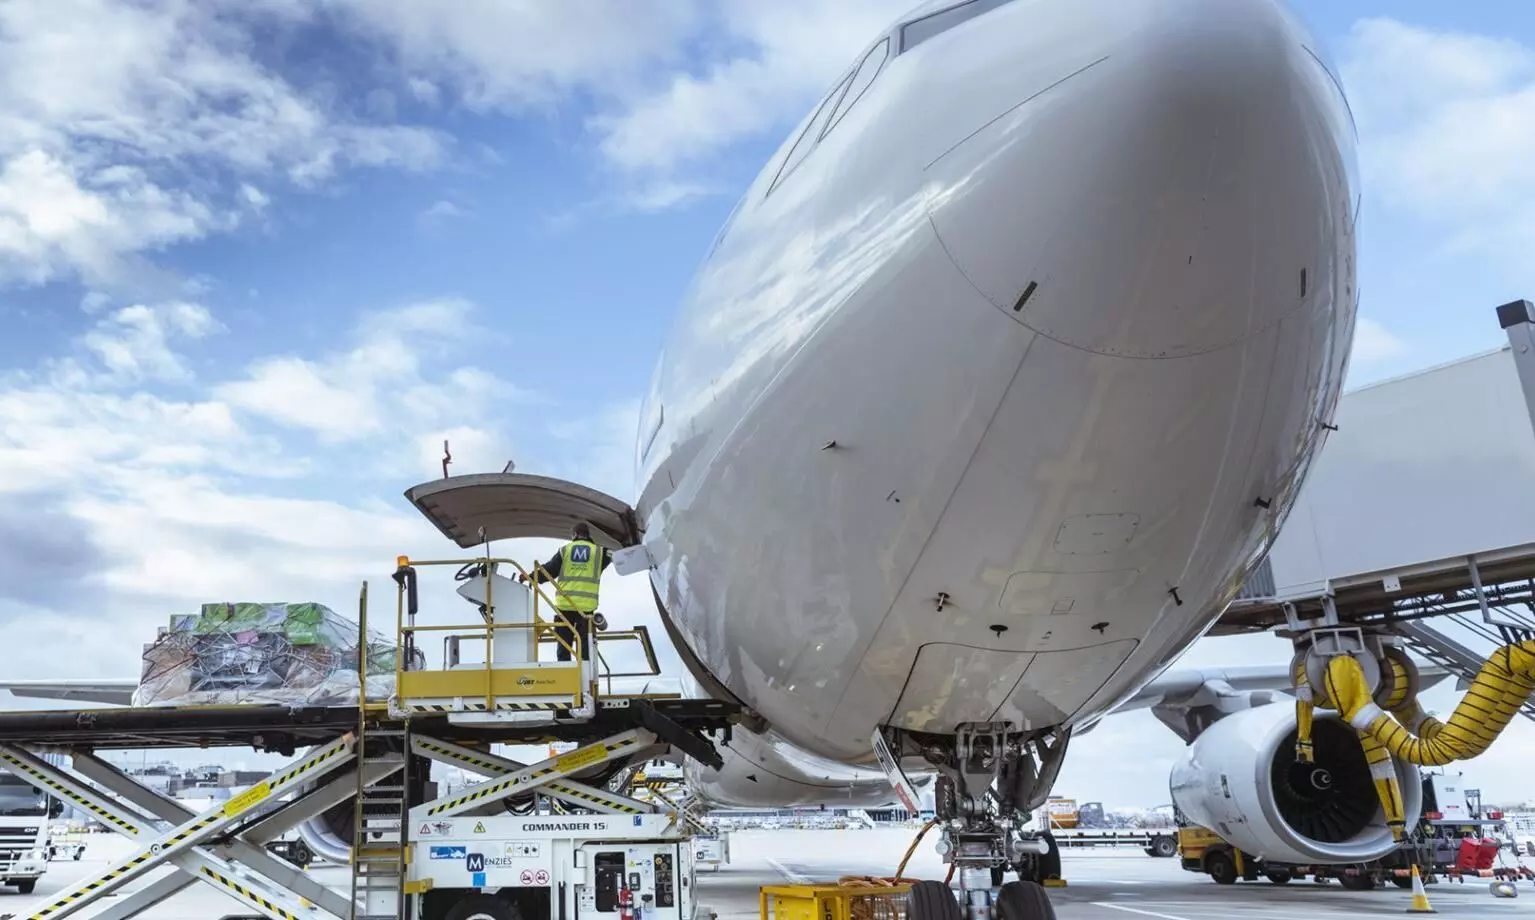 Menzies expands cargo business at Heathrow Airport